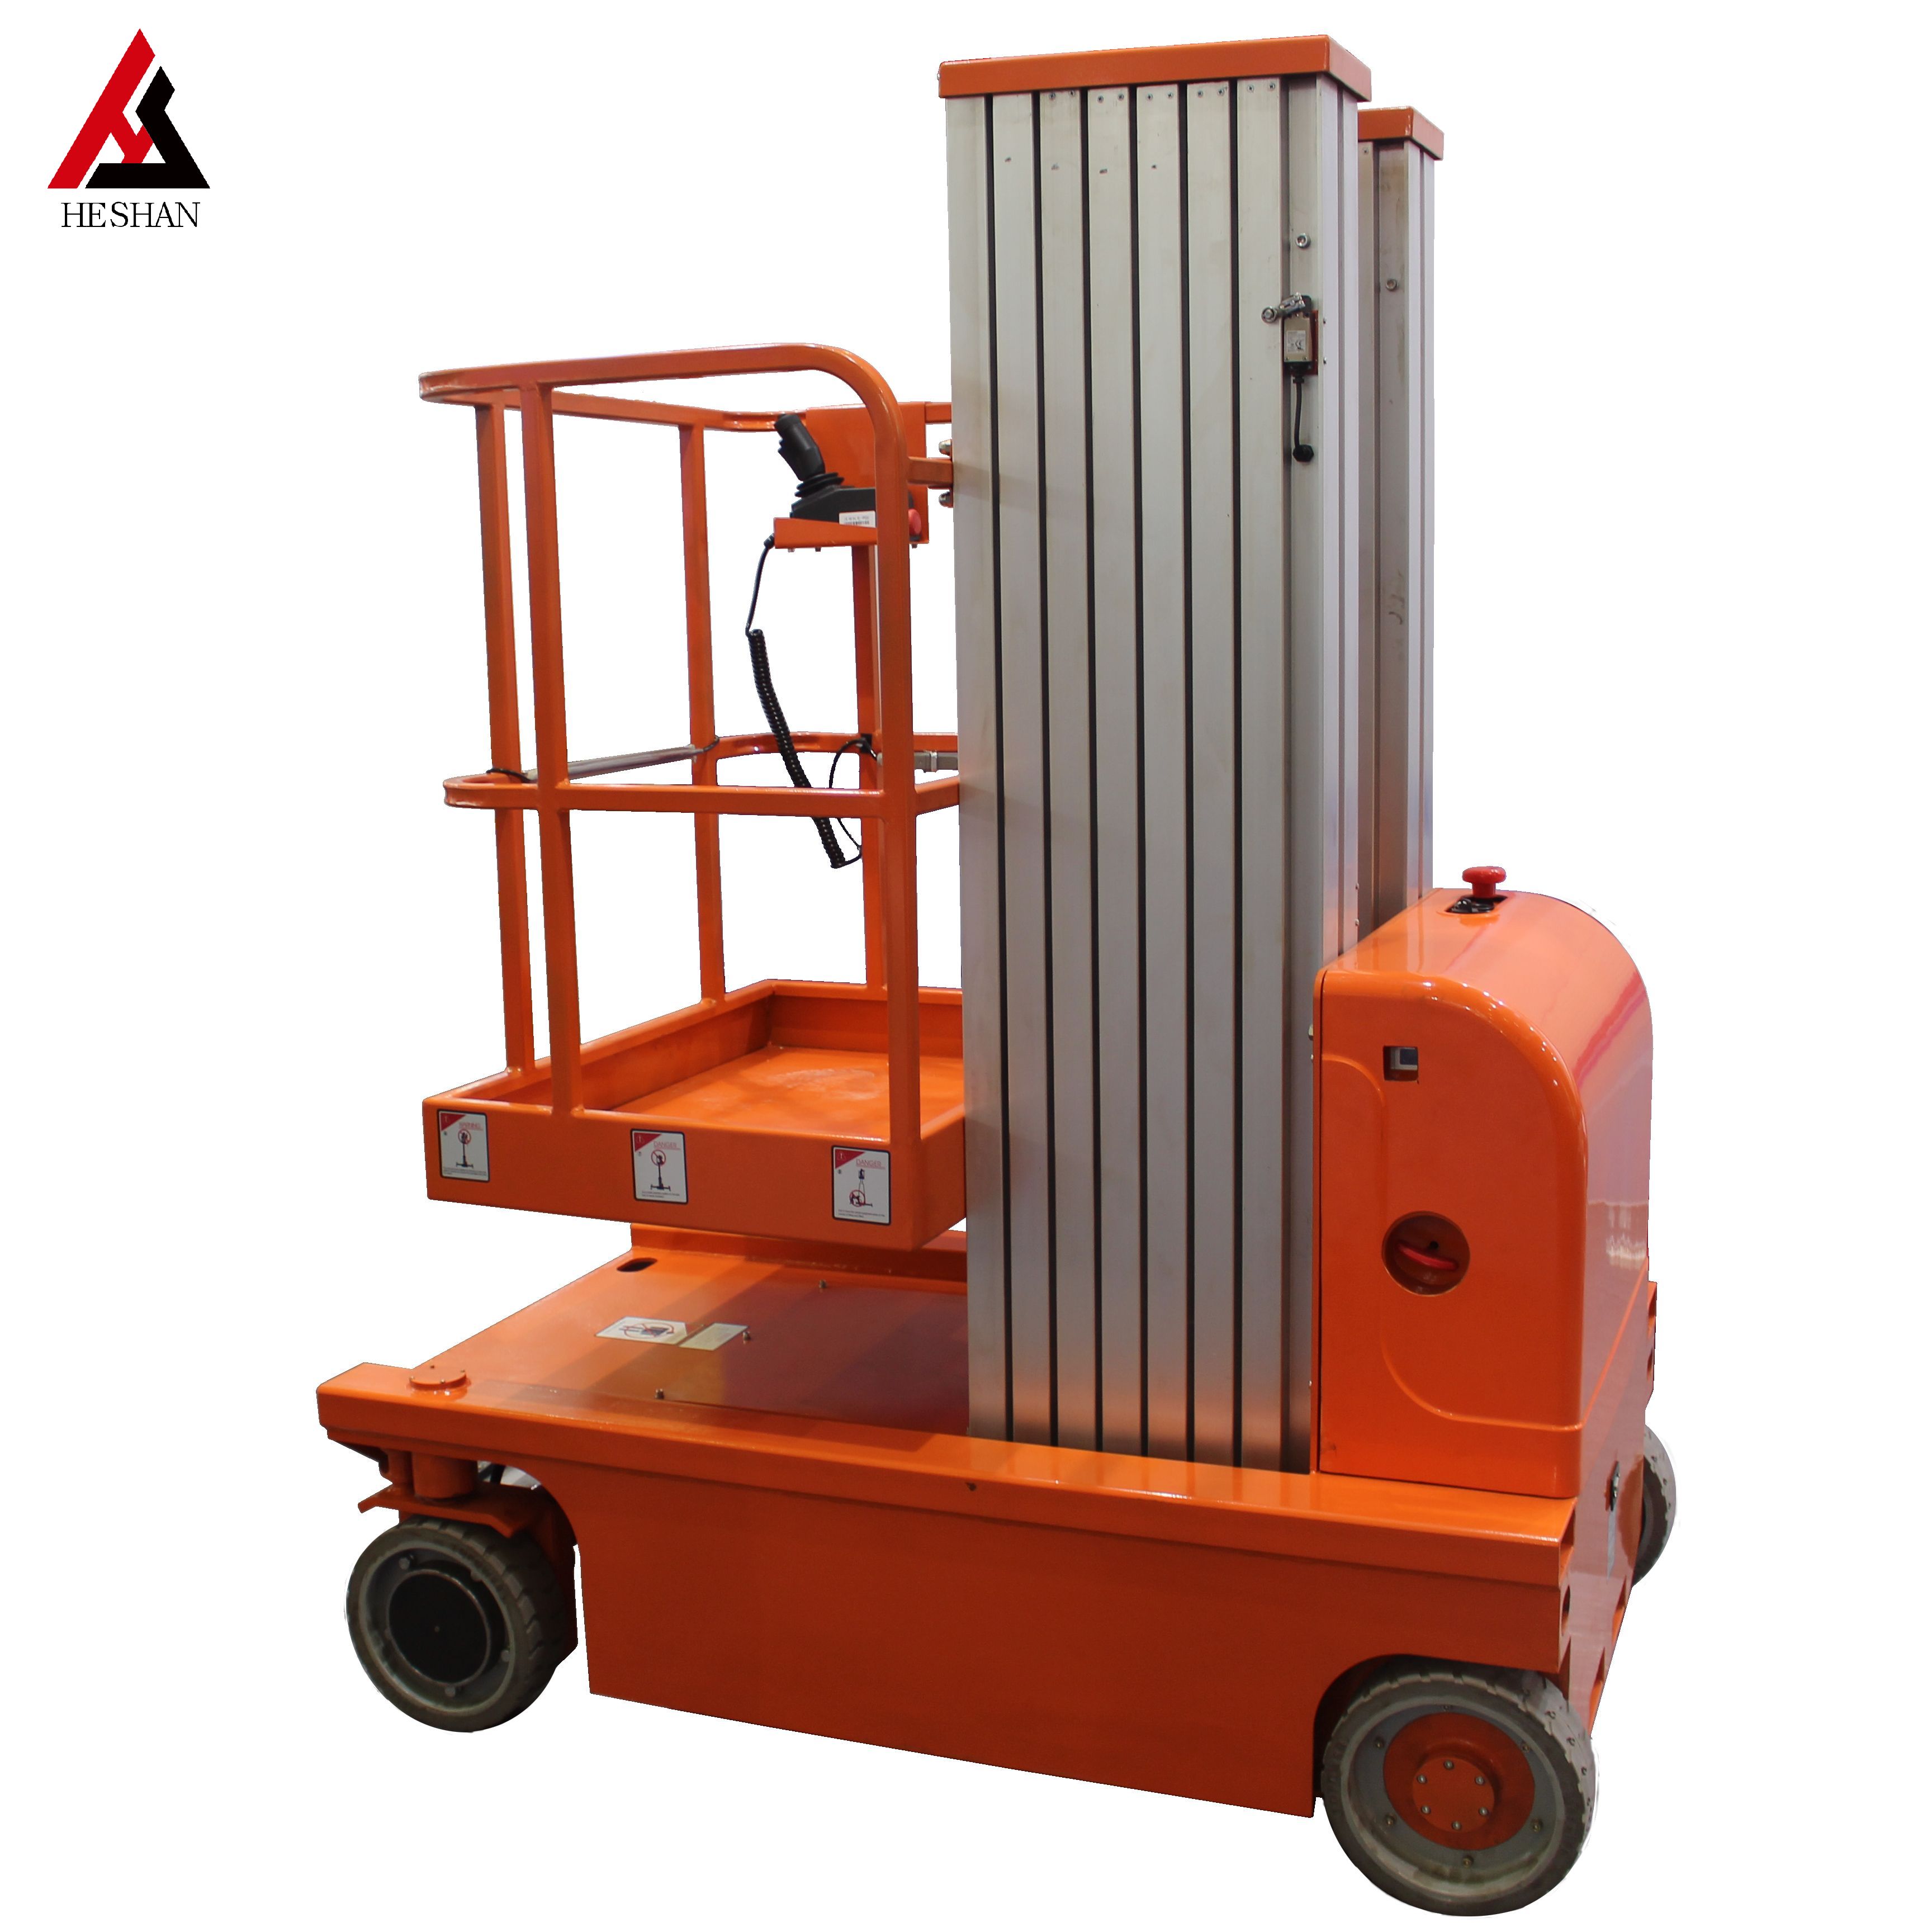 Self-Propelled Aluminum Manlifts Featured Image